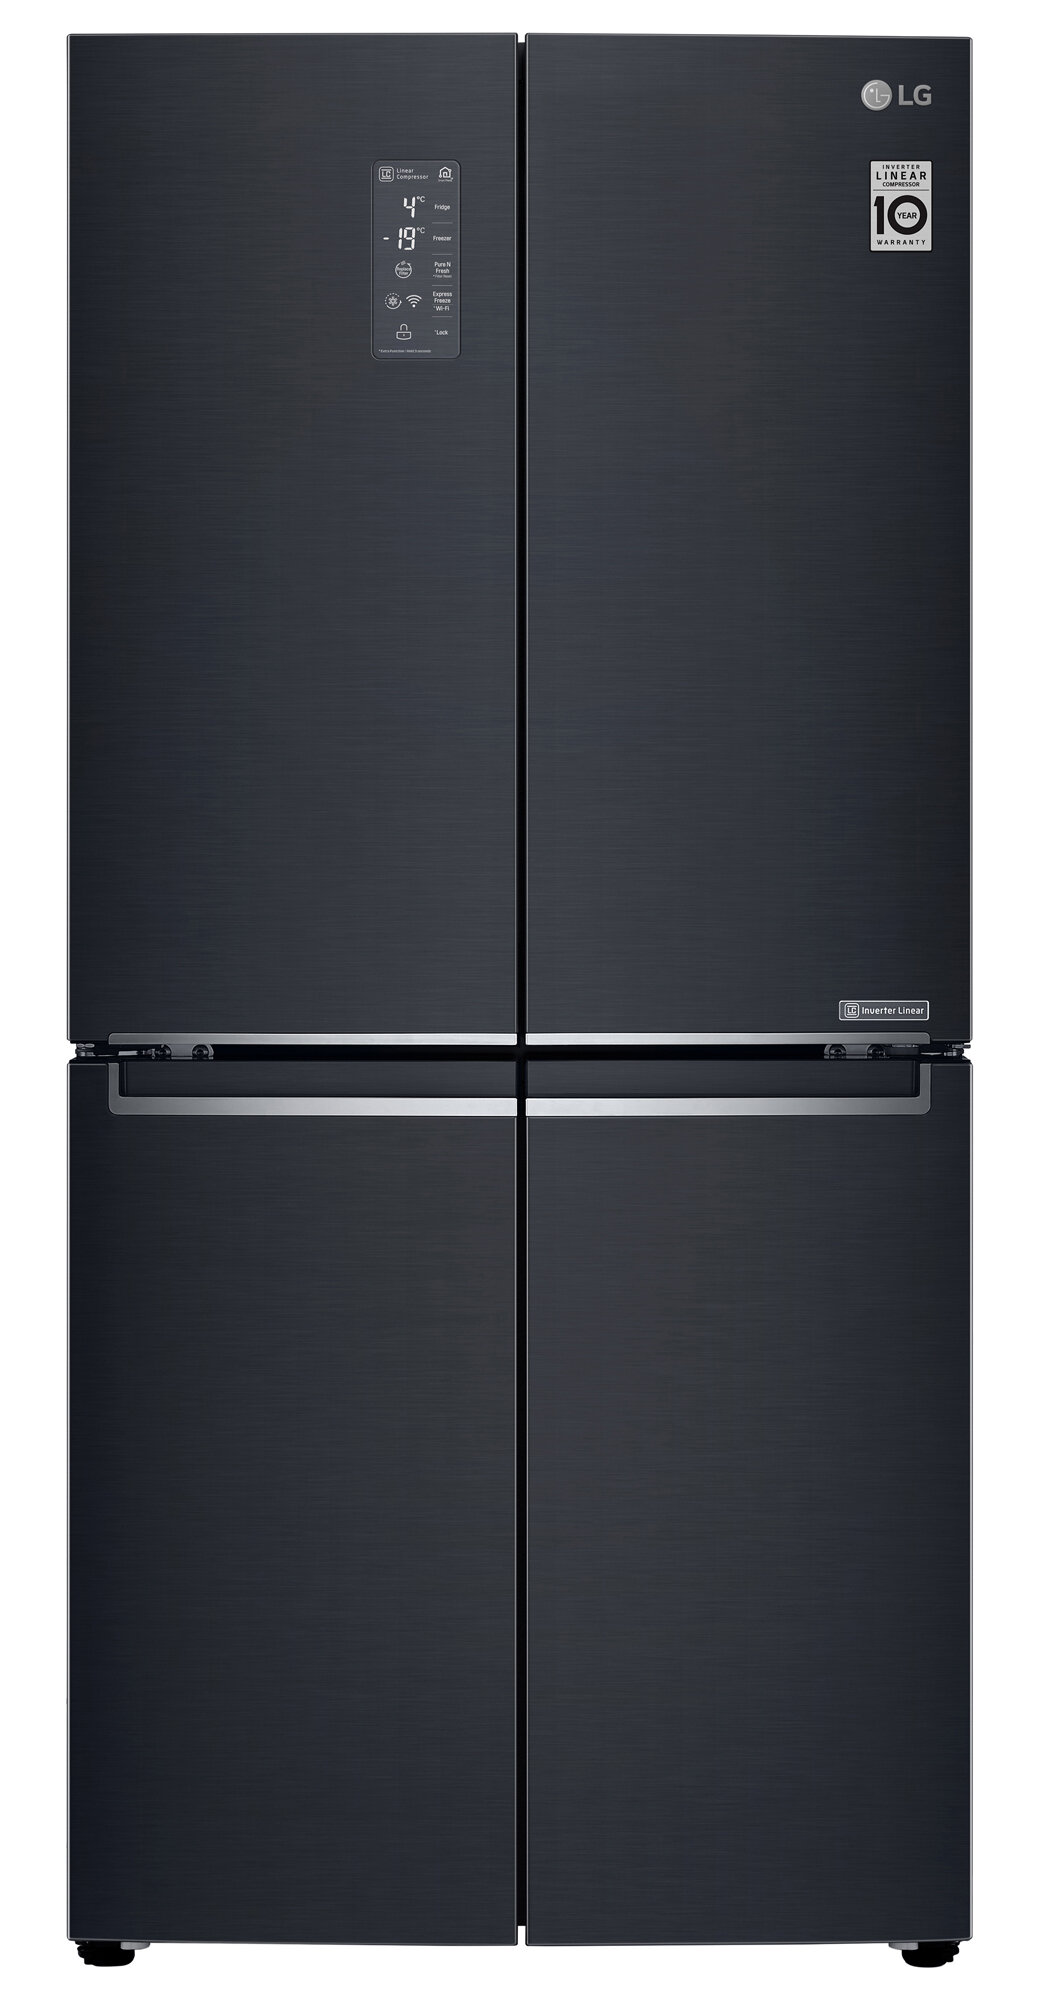 46+ Lg inverter linear fridge pure and fresh filter ideas in 2021 